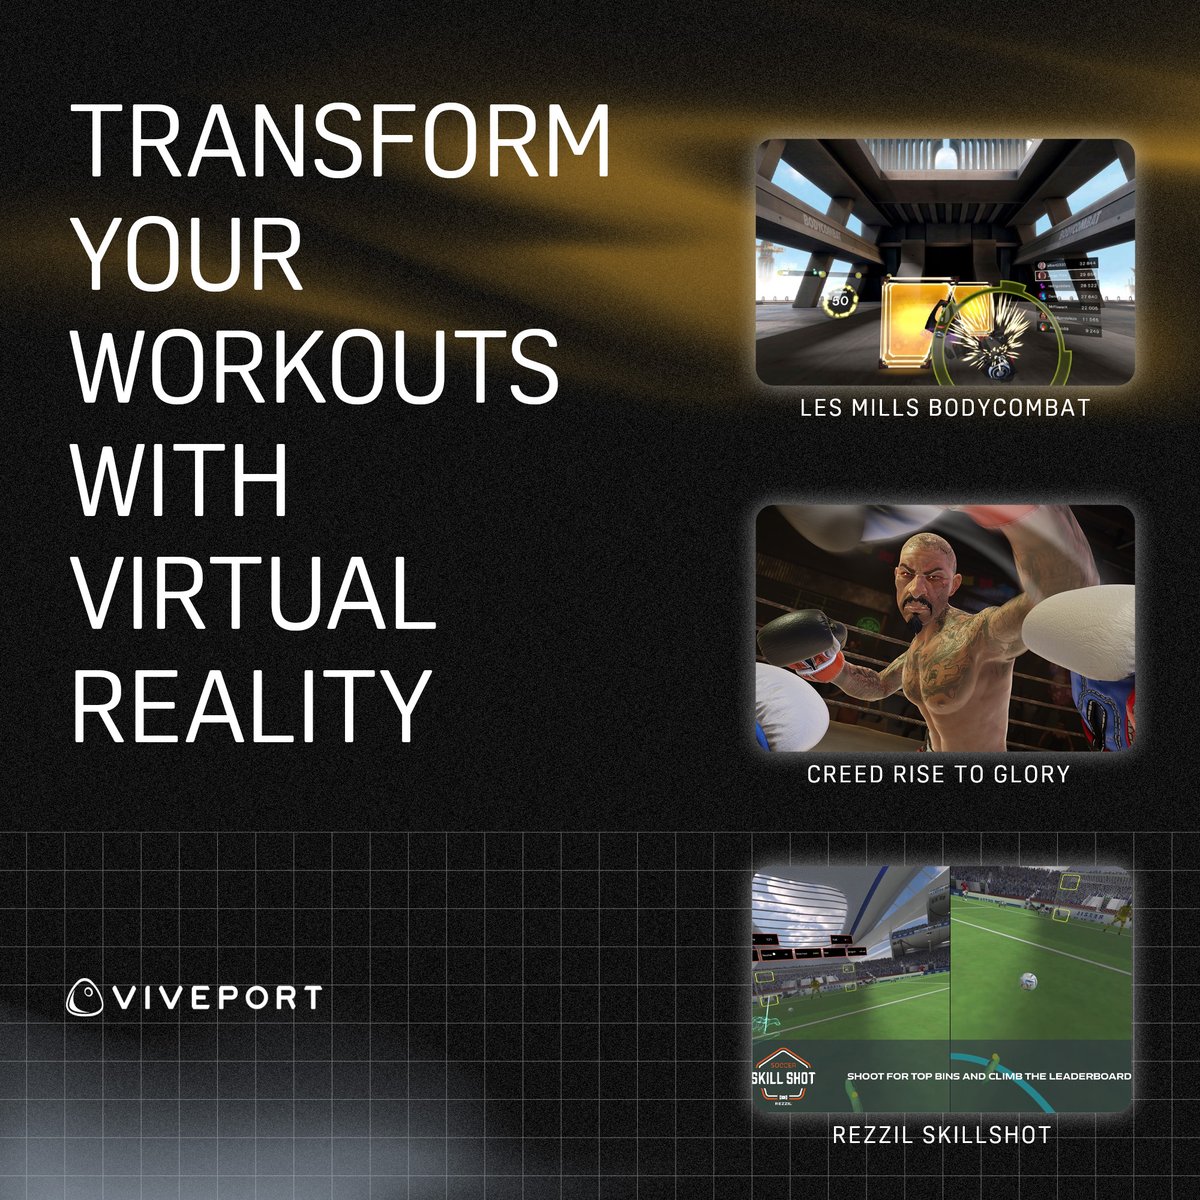 Ready to make your workouts feel like an adventure? 🙌 Go on an immersive journey that will leave you feeling exhilarated and empowered with these titles on VIVEPORT: htcvive.co/VPAGAX #Fitness #Movement #Workout #Boxing #Soccer